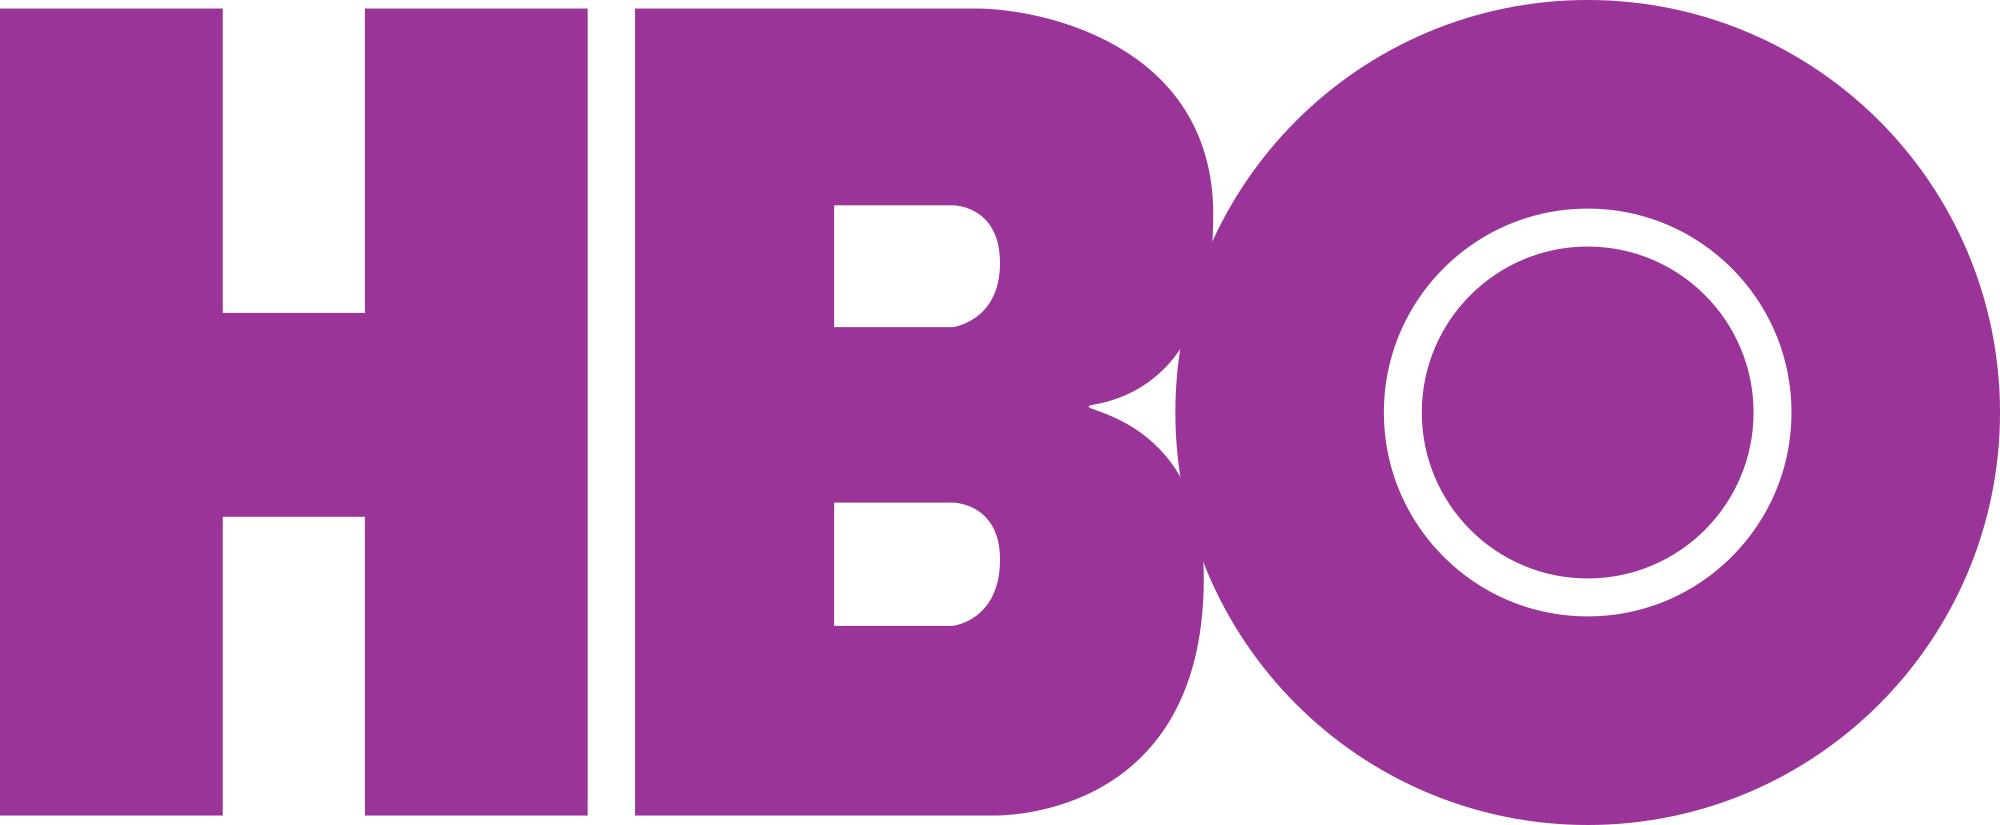 Hbo PNG HD Quality